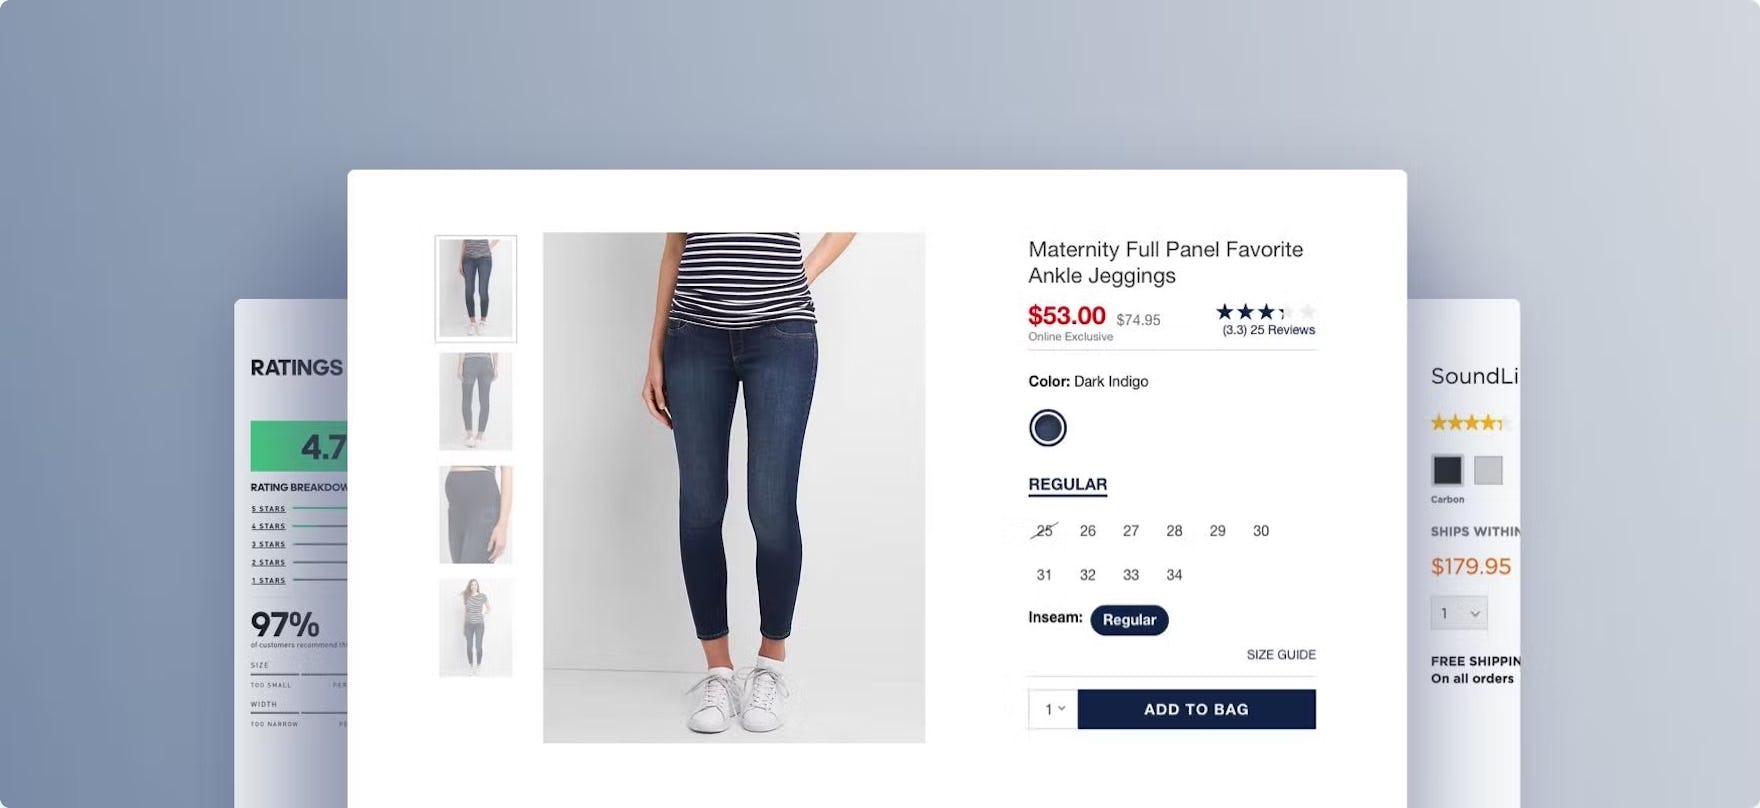 Luxury Fashion Brands: 15 Ecommerce Tips to Sell More Online - Nogin